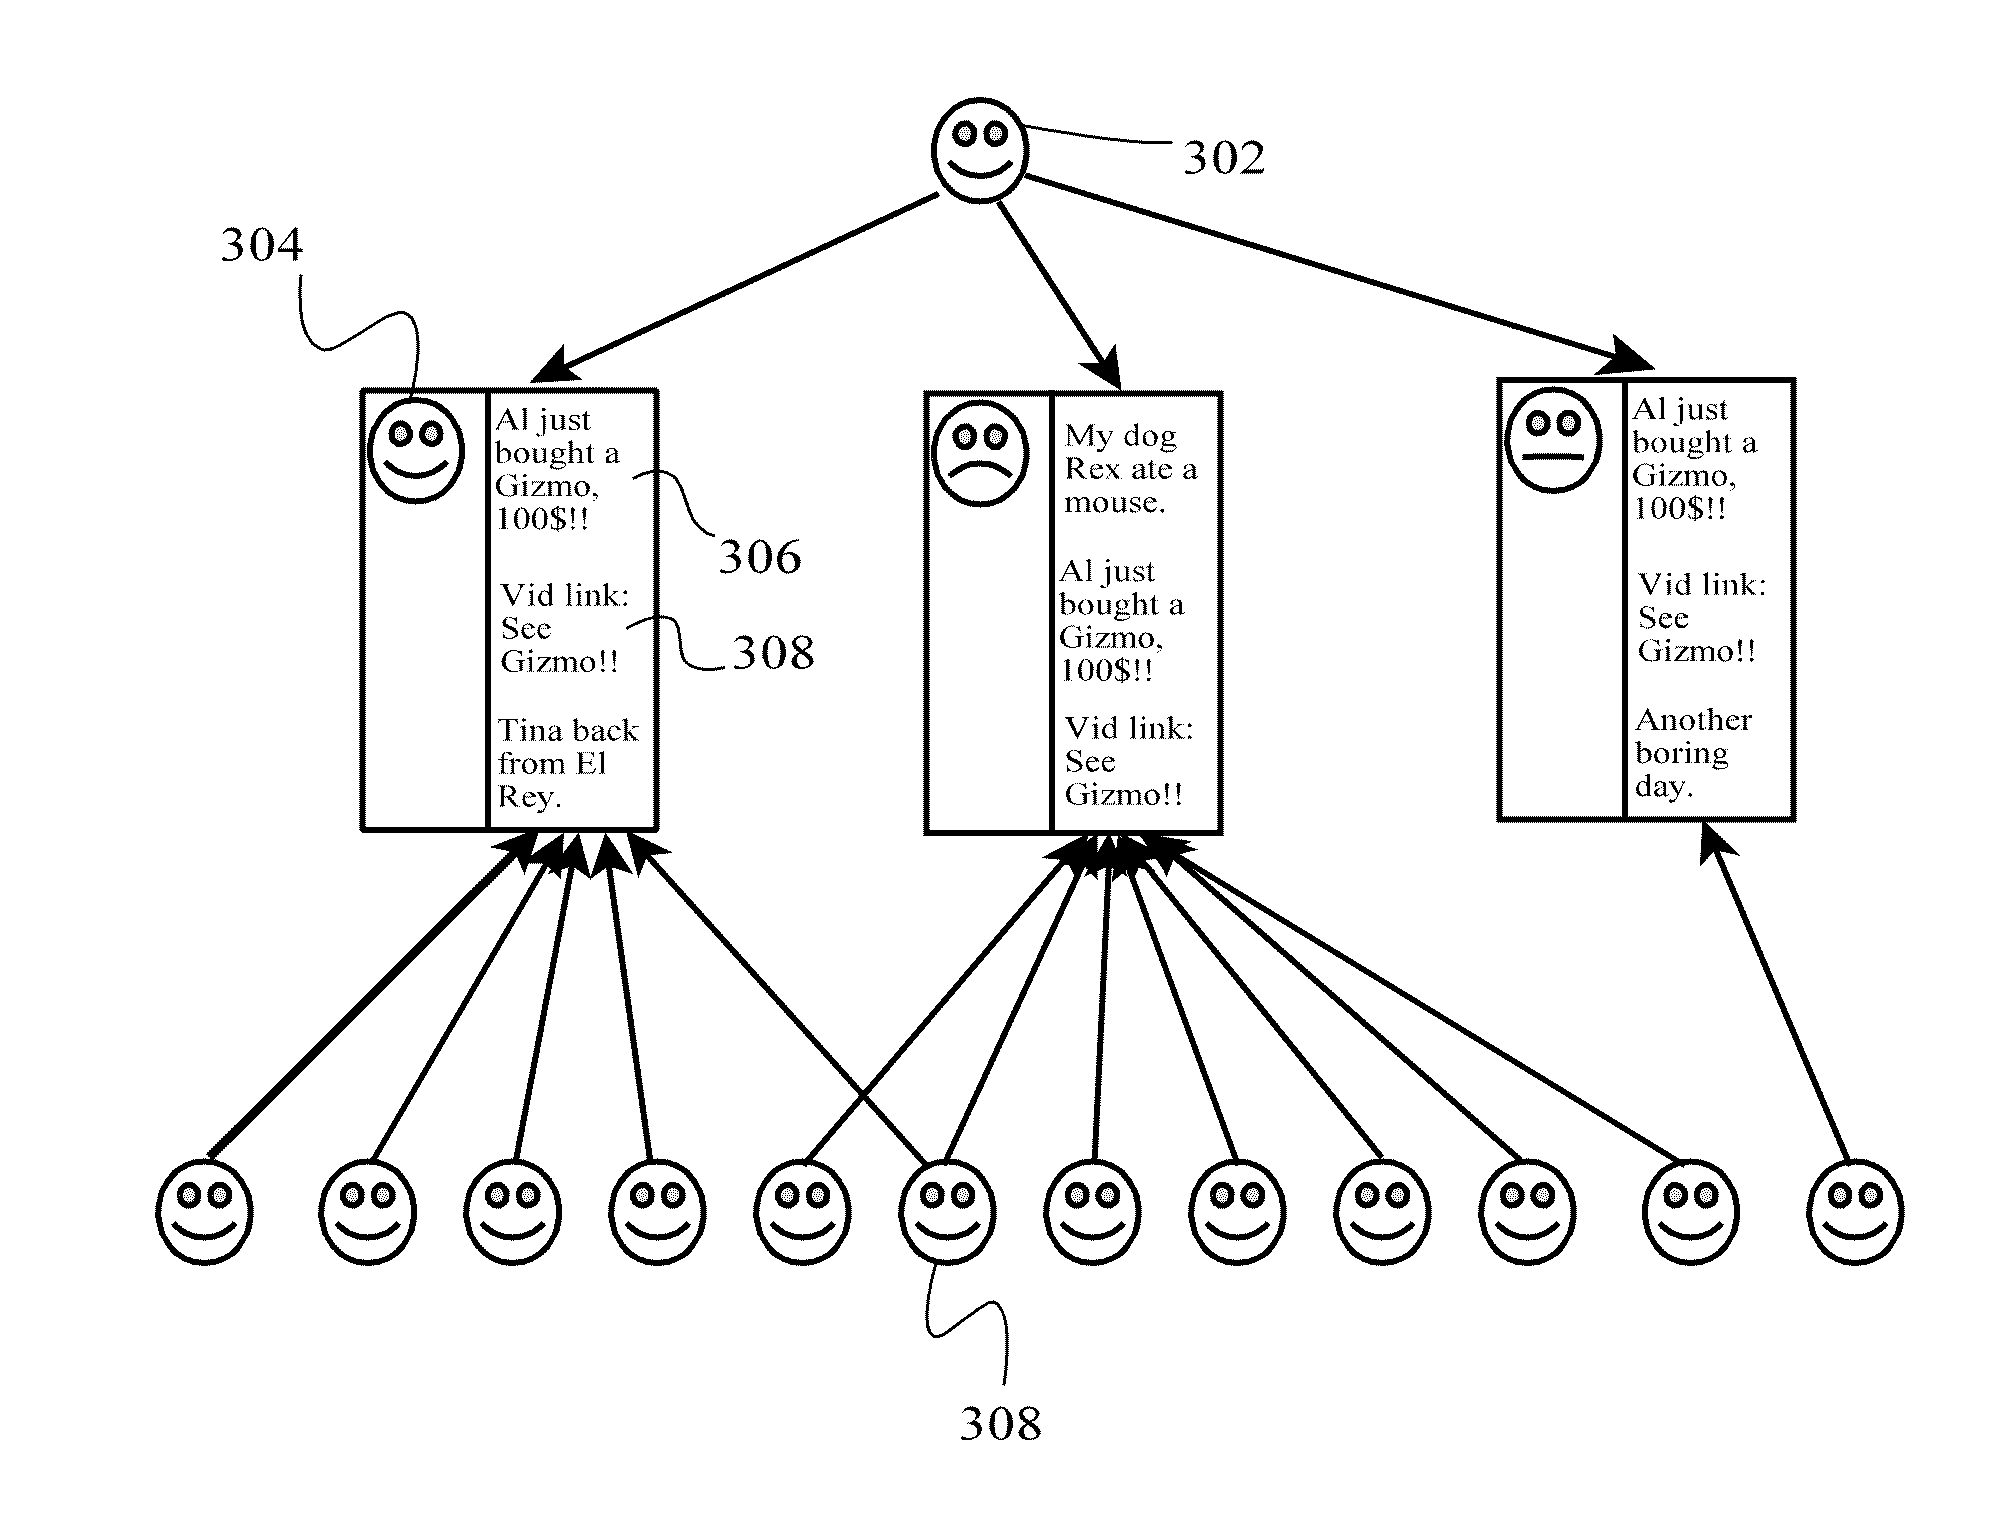 System and method for viral purchasing